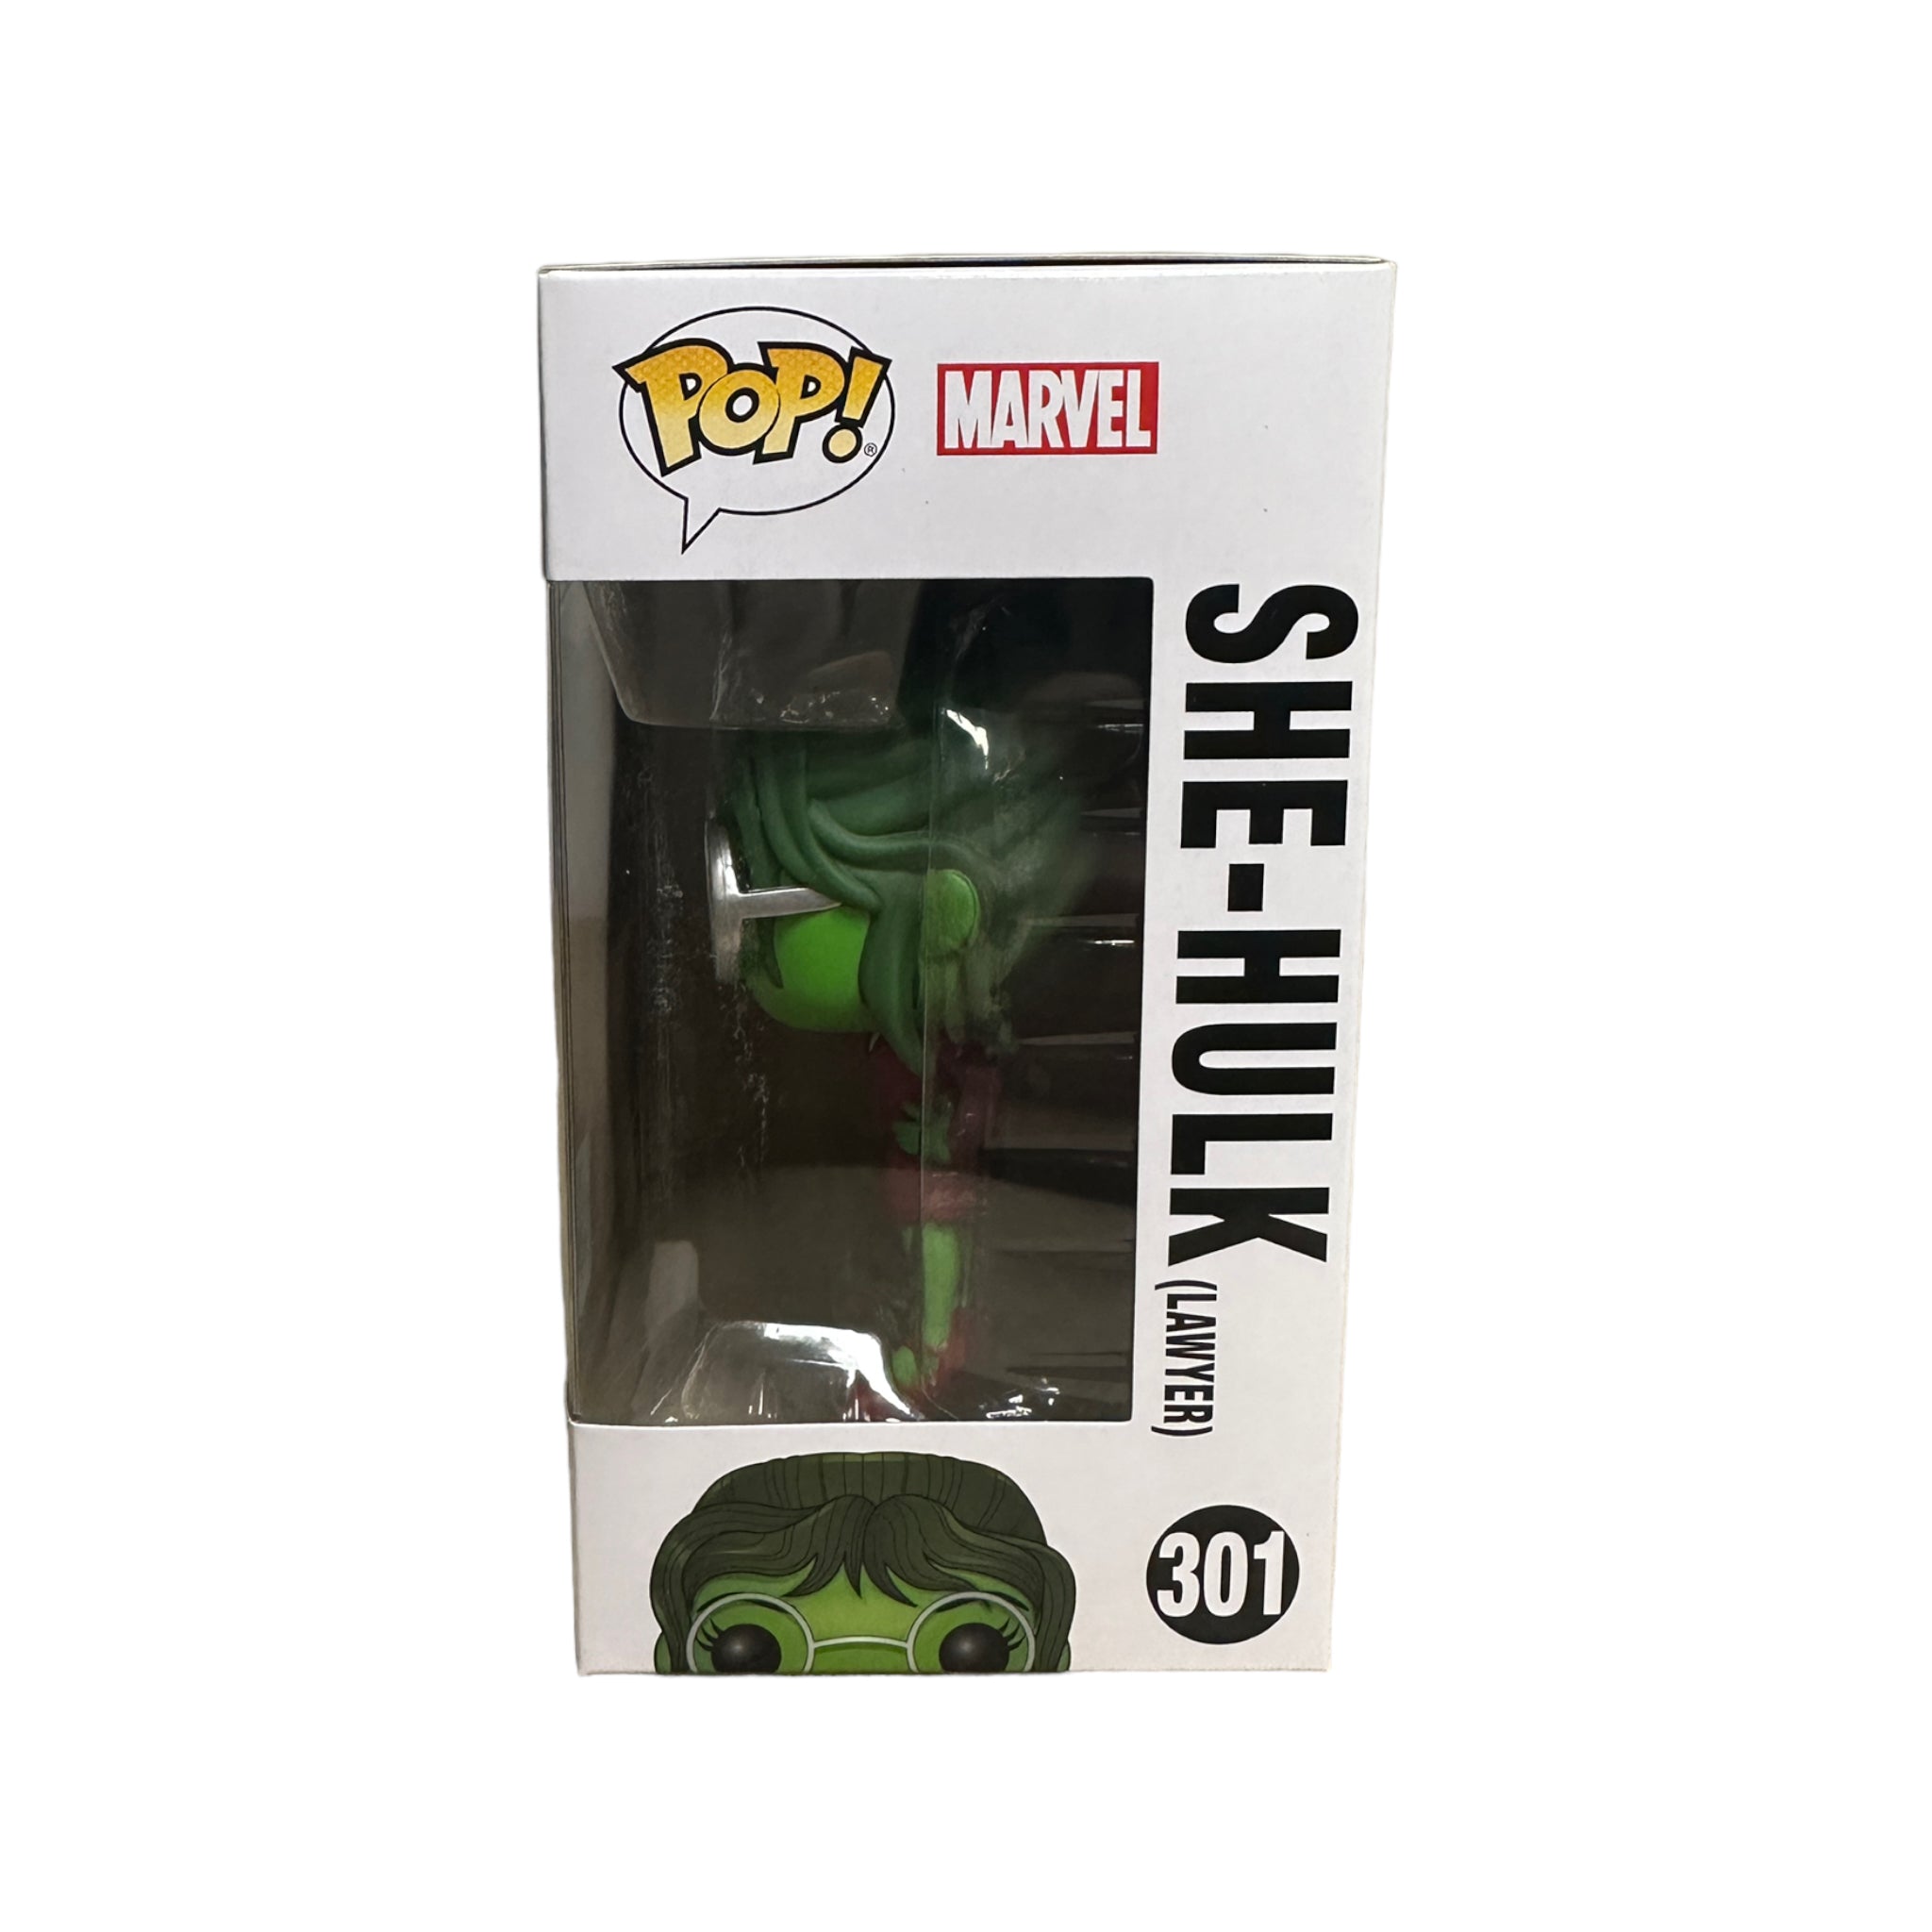 She-Hulk (Lawyer) #301 Funko Pop! - Marvel - ECCC 2018 Official Convention Exclusive - Condition 8.75/10